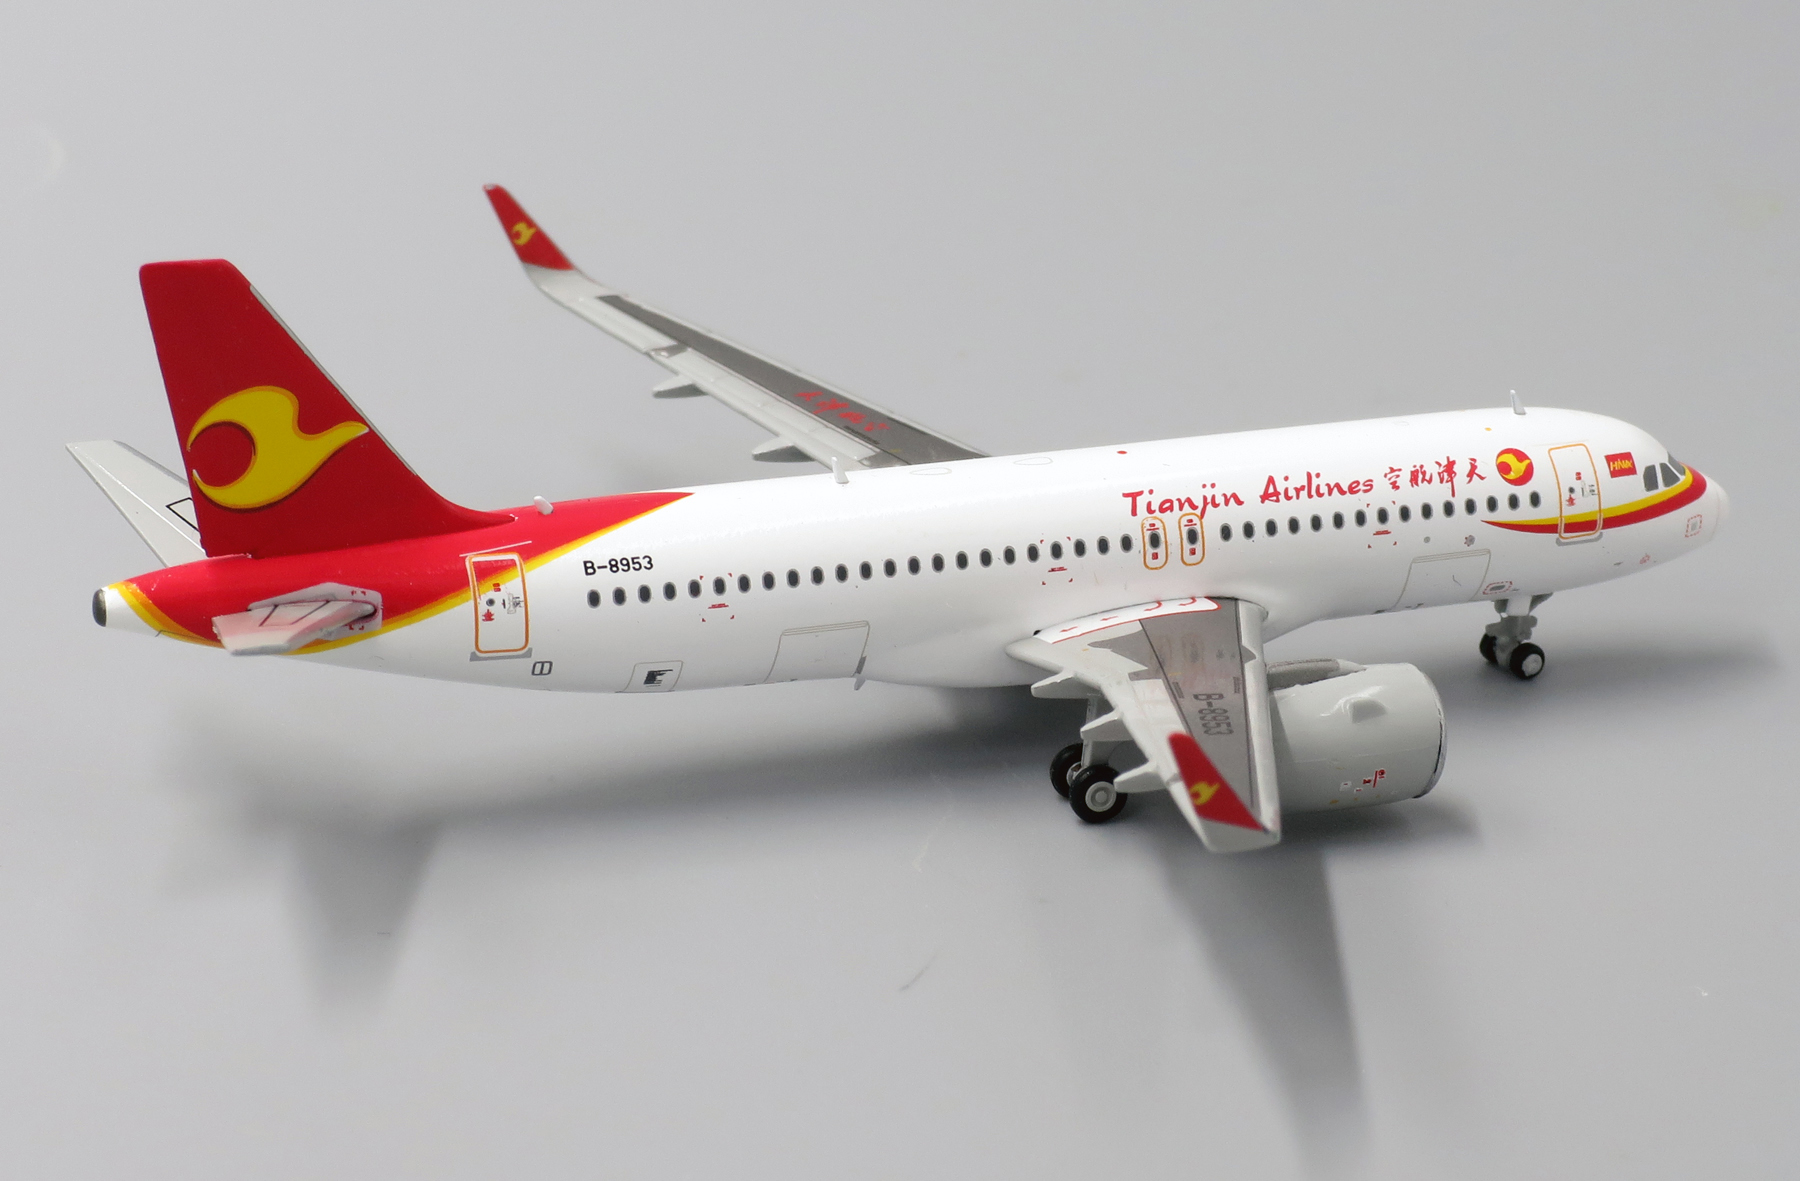 Details about   JCWINGS JCLH4067 1/400 TIANJIN AIRLINES AIRBUS A320NEO REG B-8953 WITH ANTENNA 